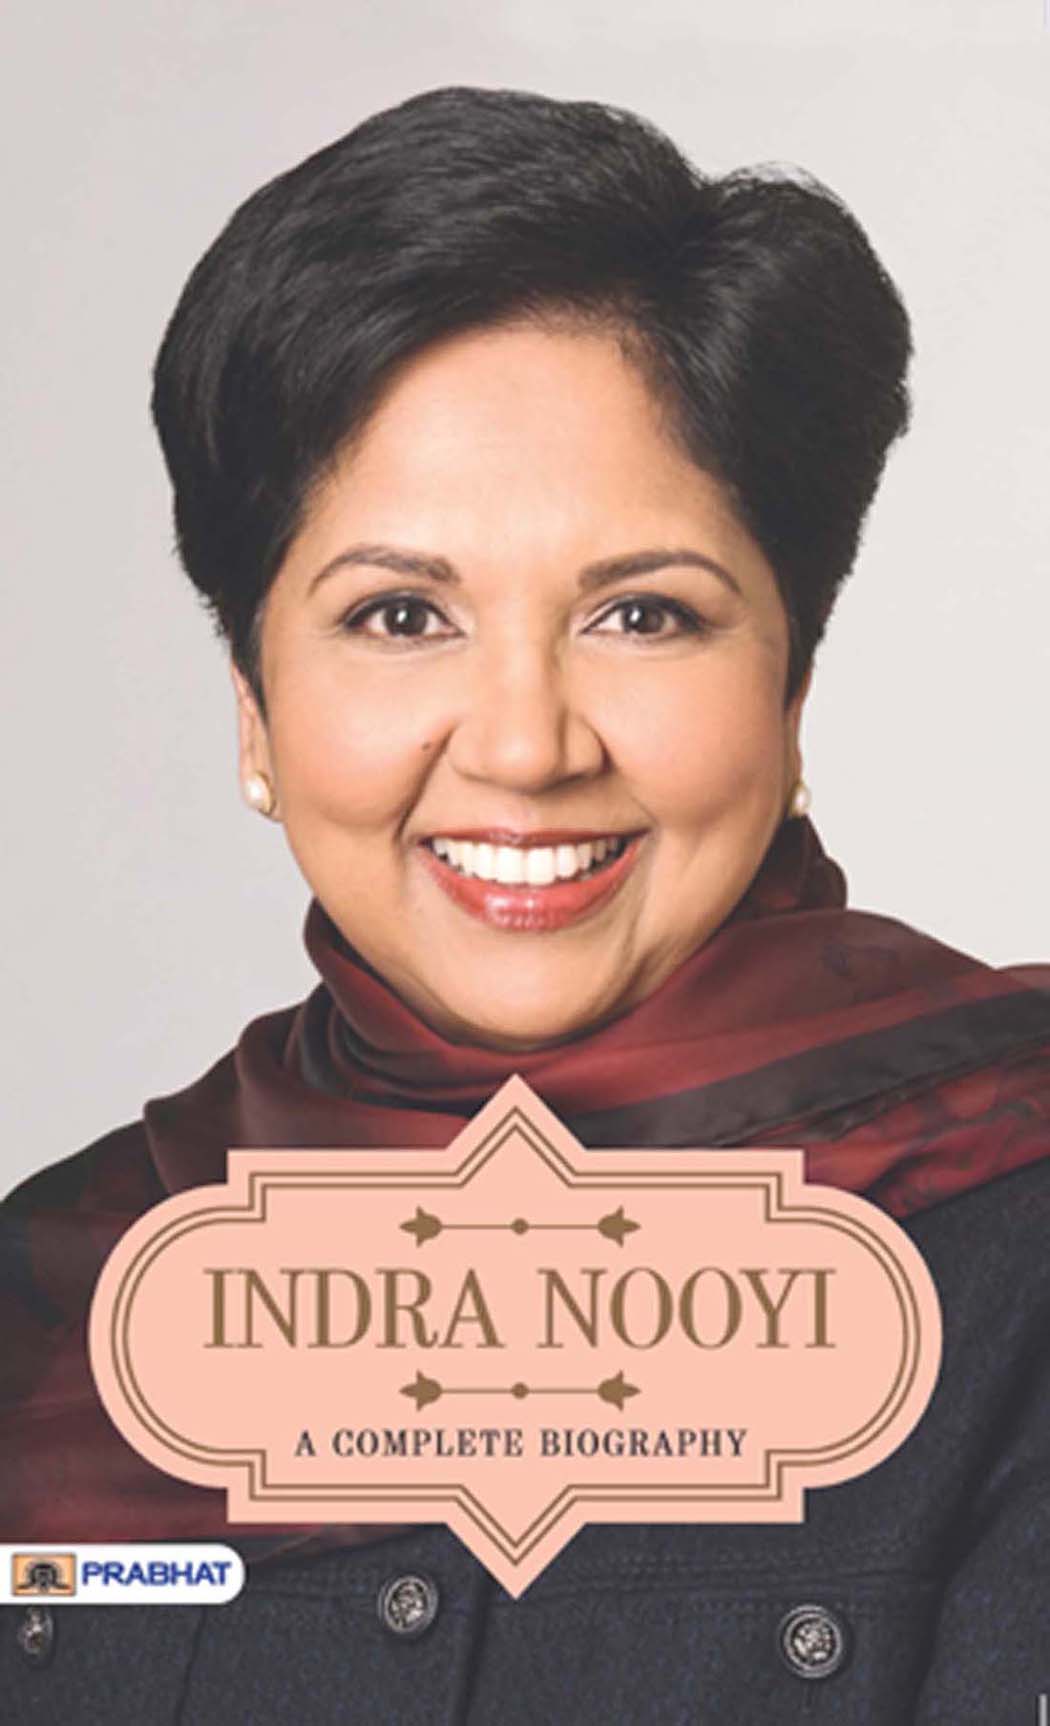 Indra Nooyi A Complete Biography